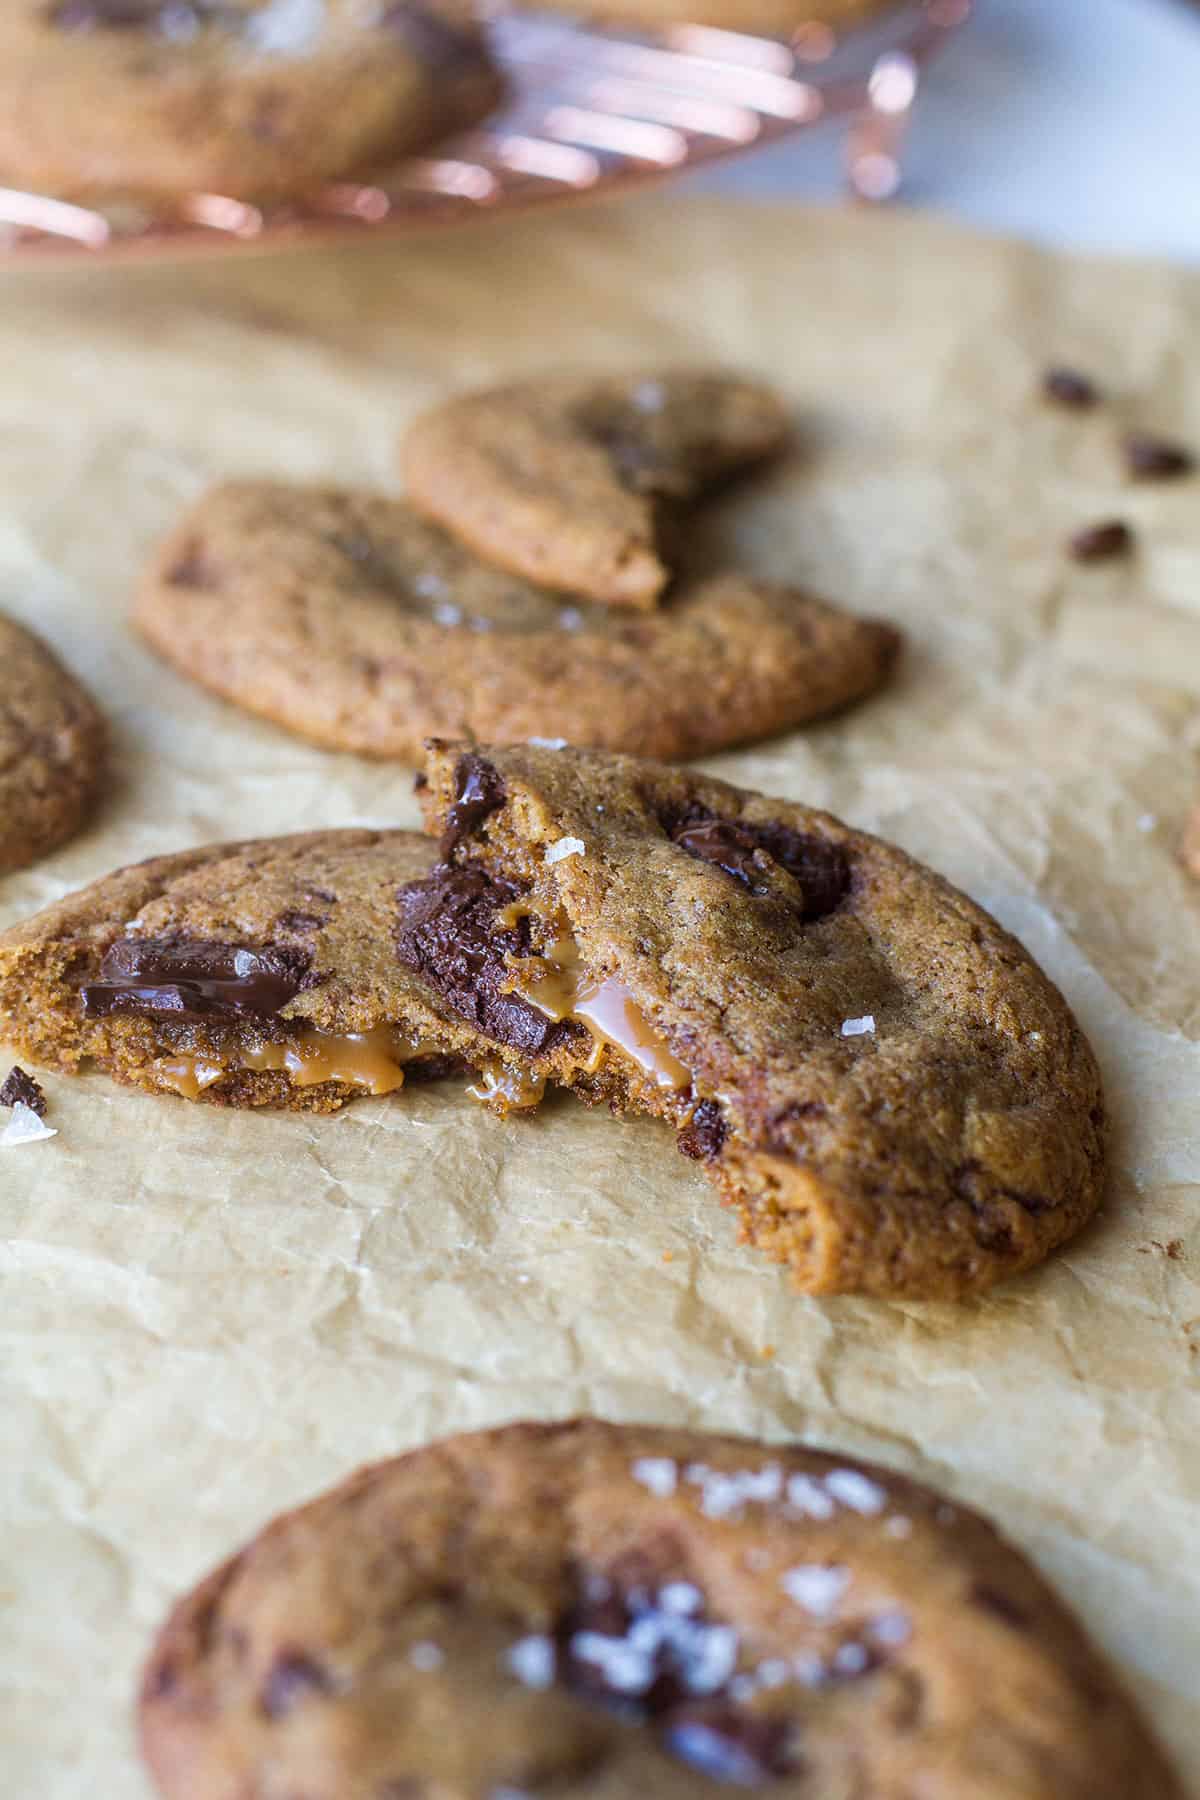 A broken cookie to show the salted caramel oozing out.